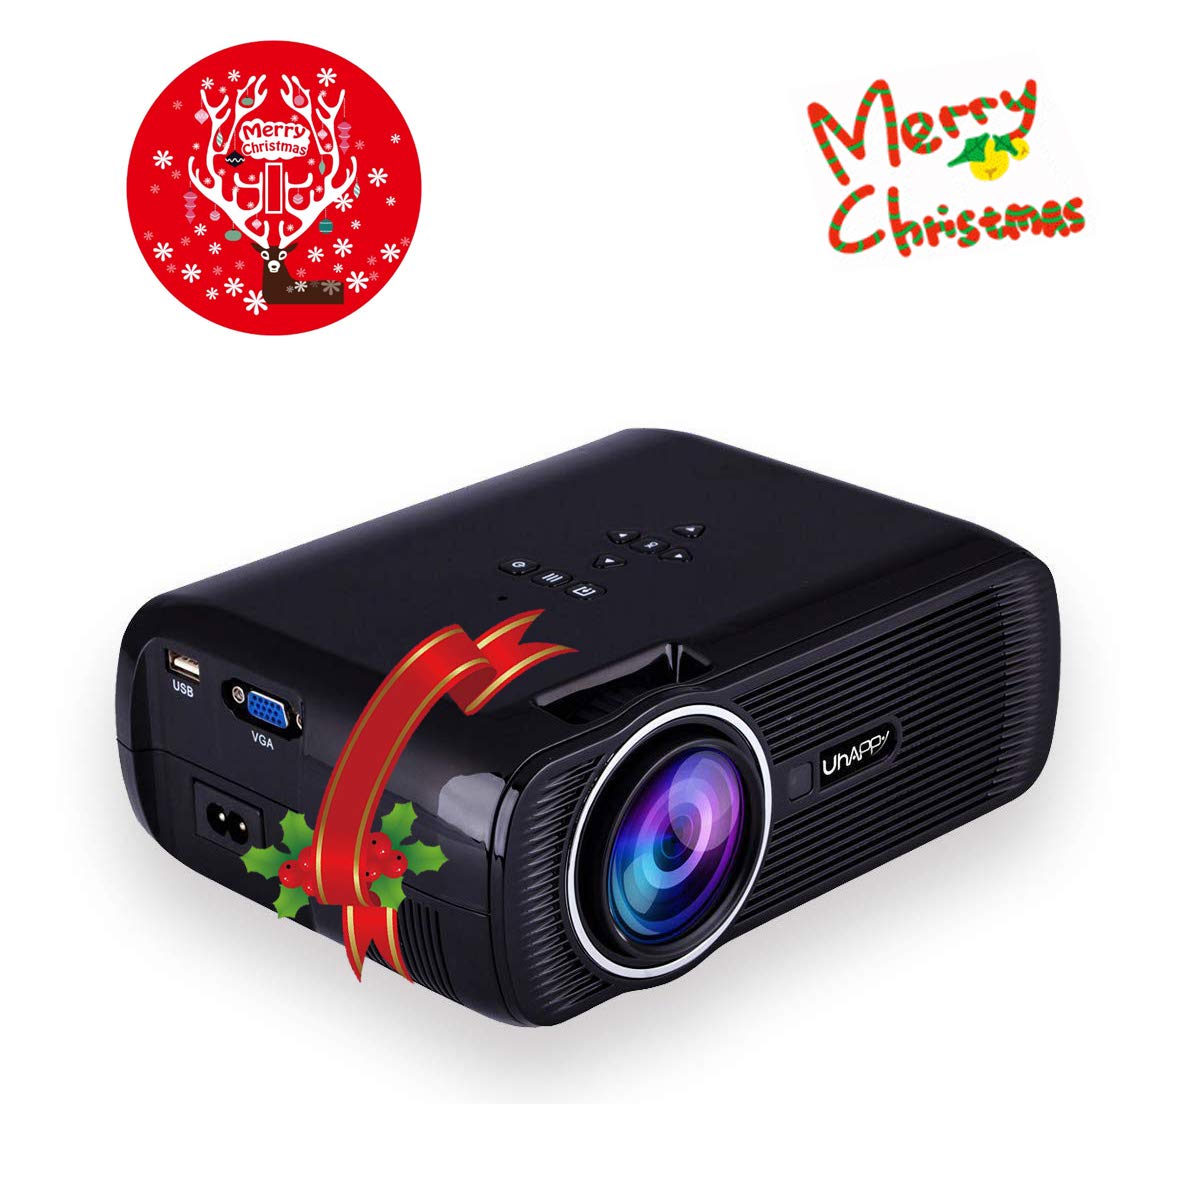 TOPRUI 2018 Mini LED Movie Video Projector, +30% Brighter Lumens Full HD Portable Projector 1080P with 170" Big Display for Outdoor/ Home Theater HDMI,TV,SD Card,AV,VGA,USB, iPhone Android Laptop